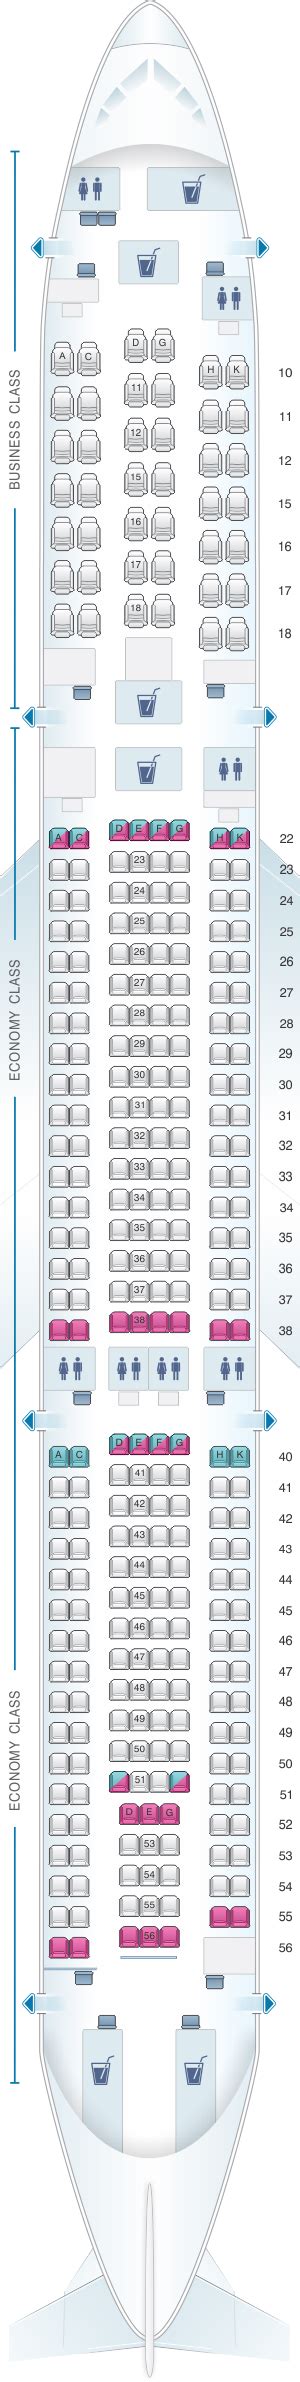 Seat Map Cathay Pacific Airways Cathay Dragon Airbus A330 300 A33c